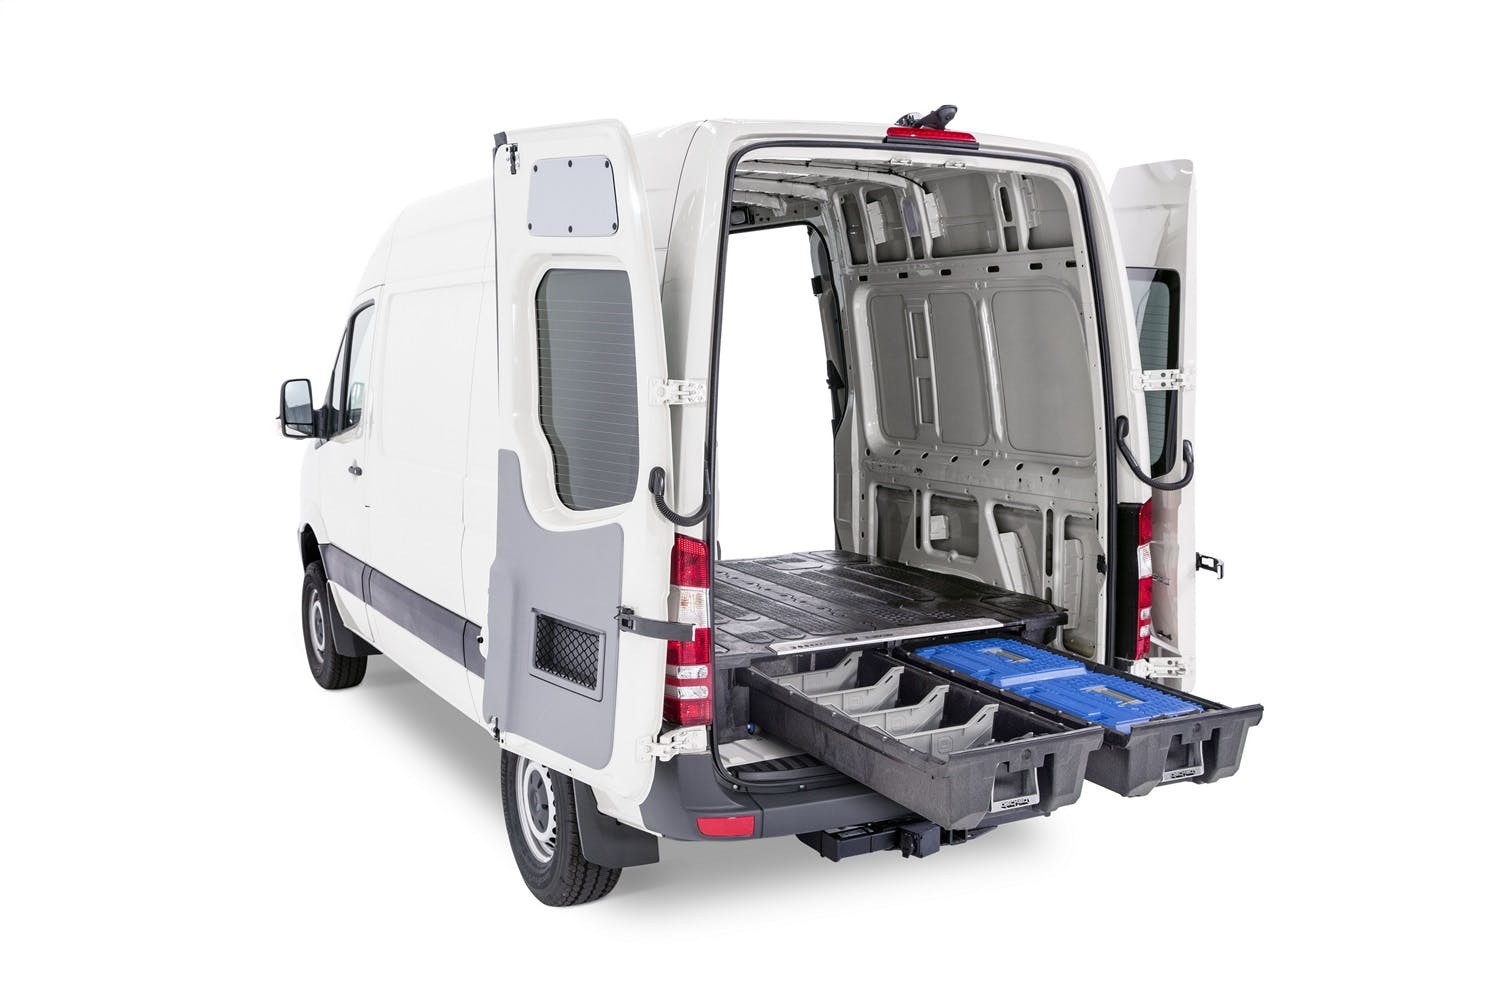 DECKED VNMB07SPRT55 64.54 Two Drawer Storage System for A Full Size Cargo Van